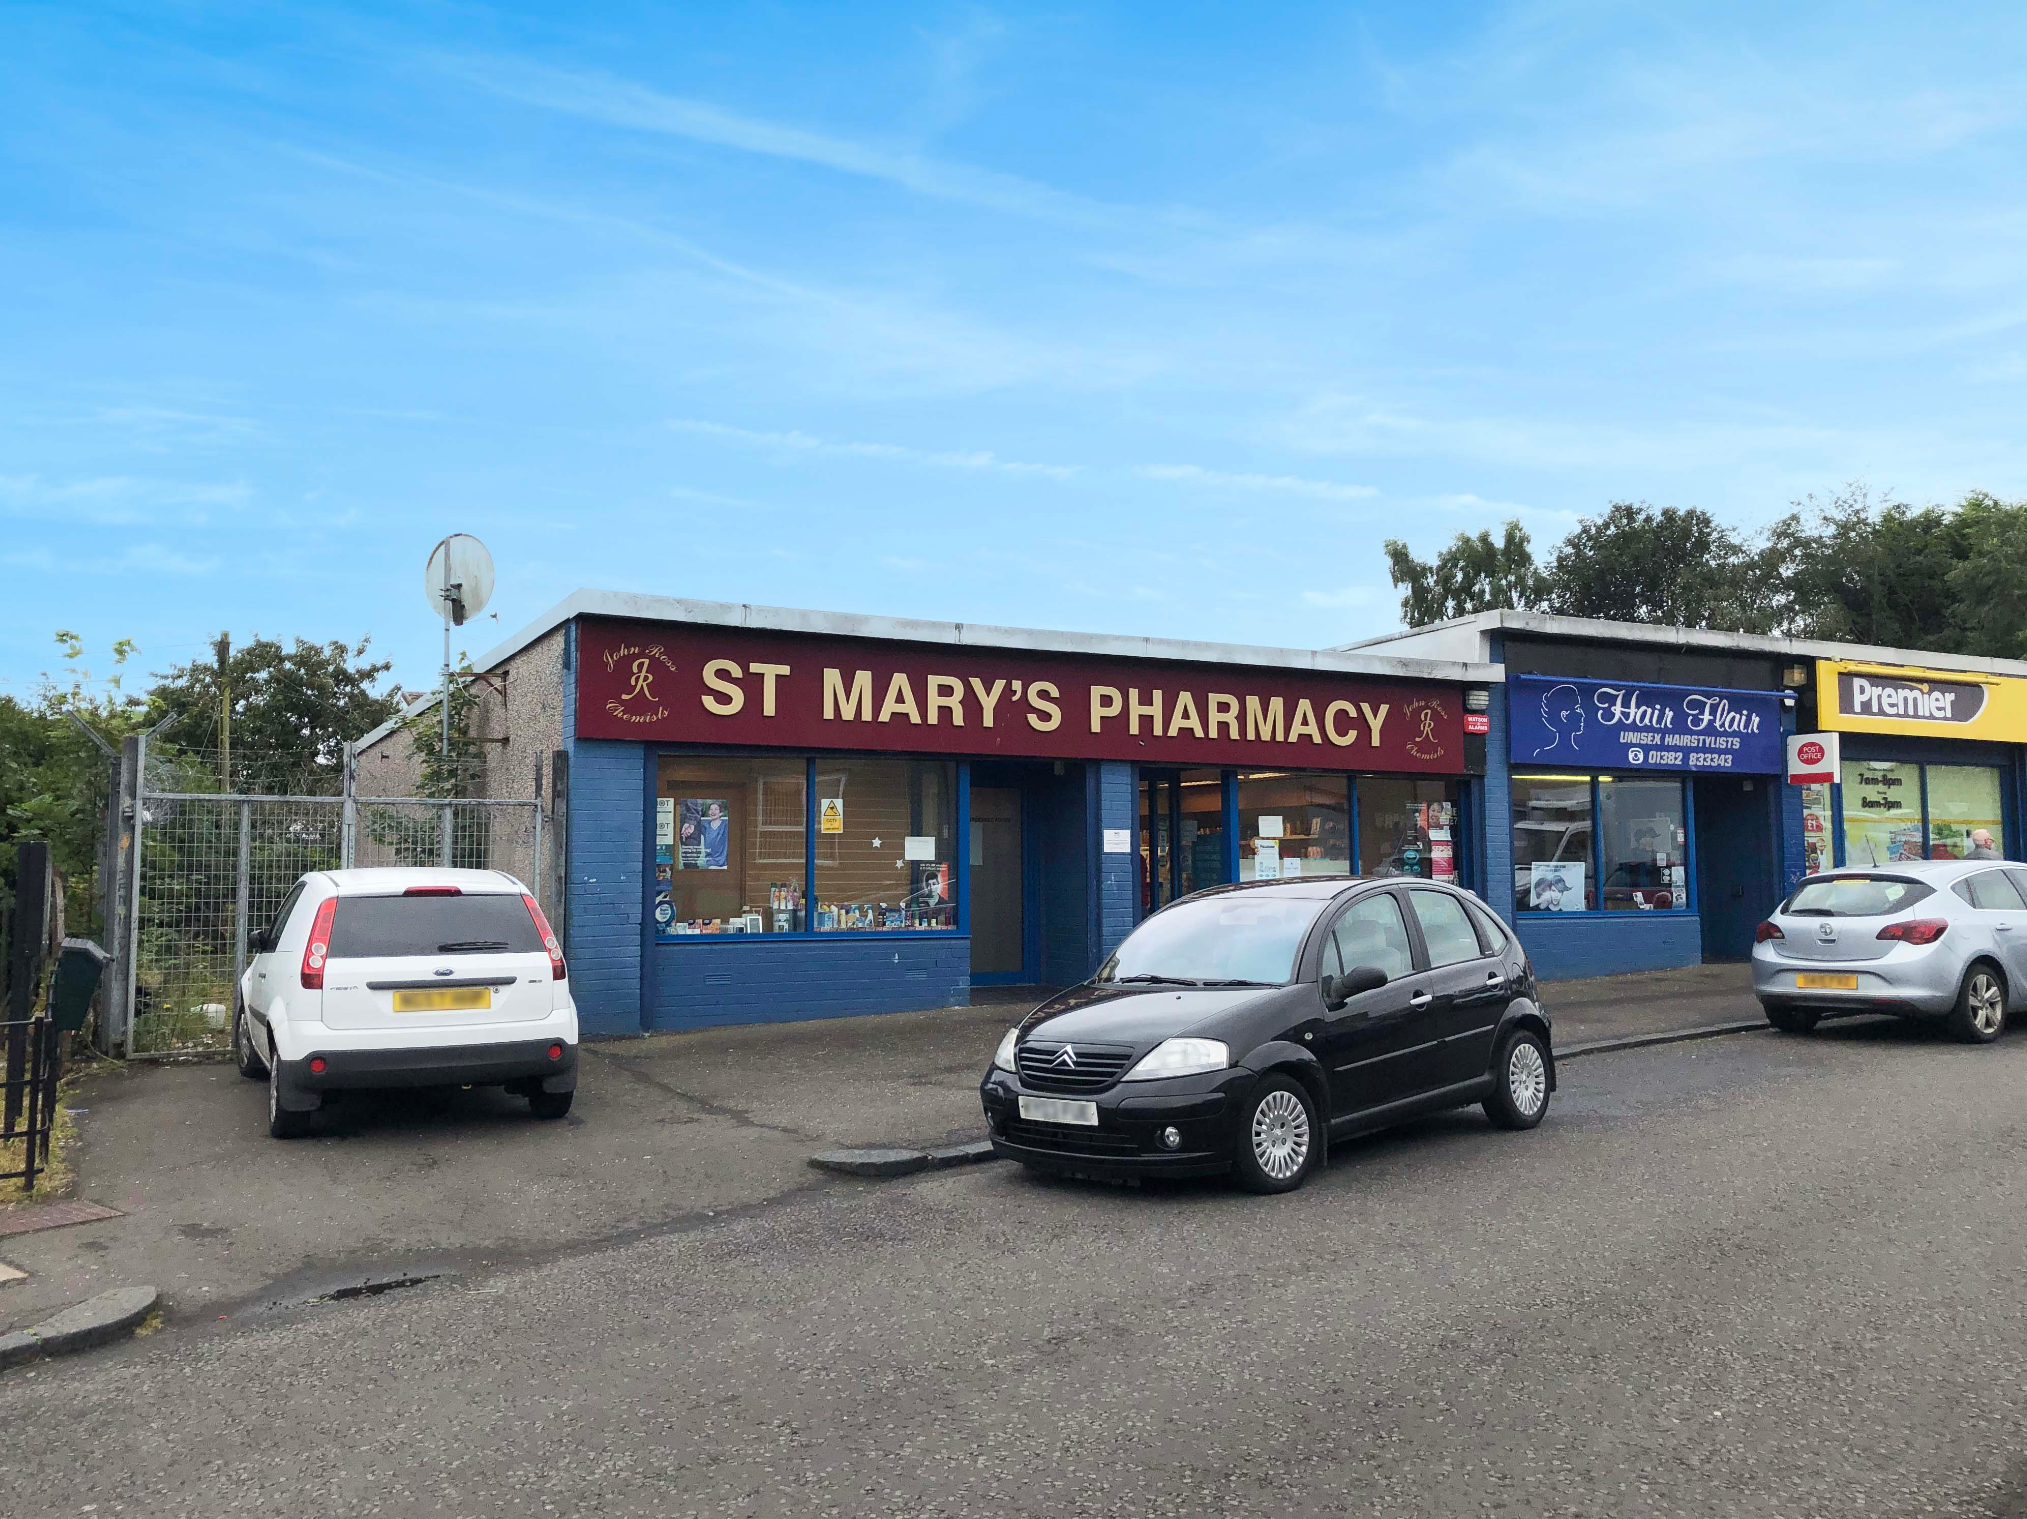 St Mary's Pharmacy in Dundee, Scotland